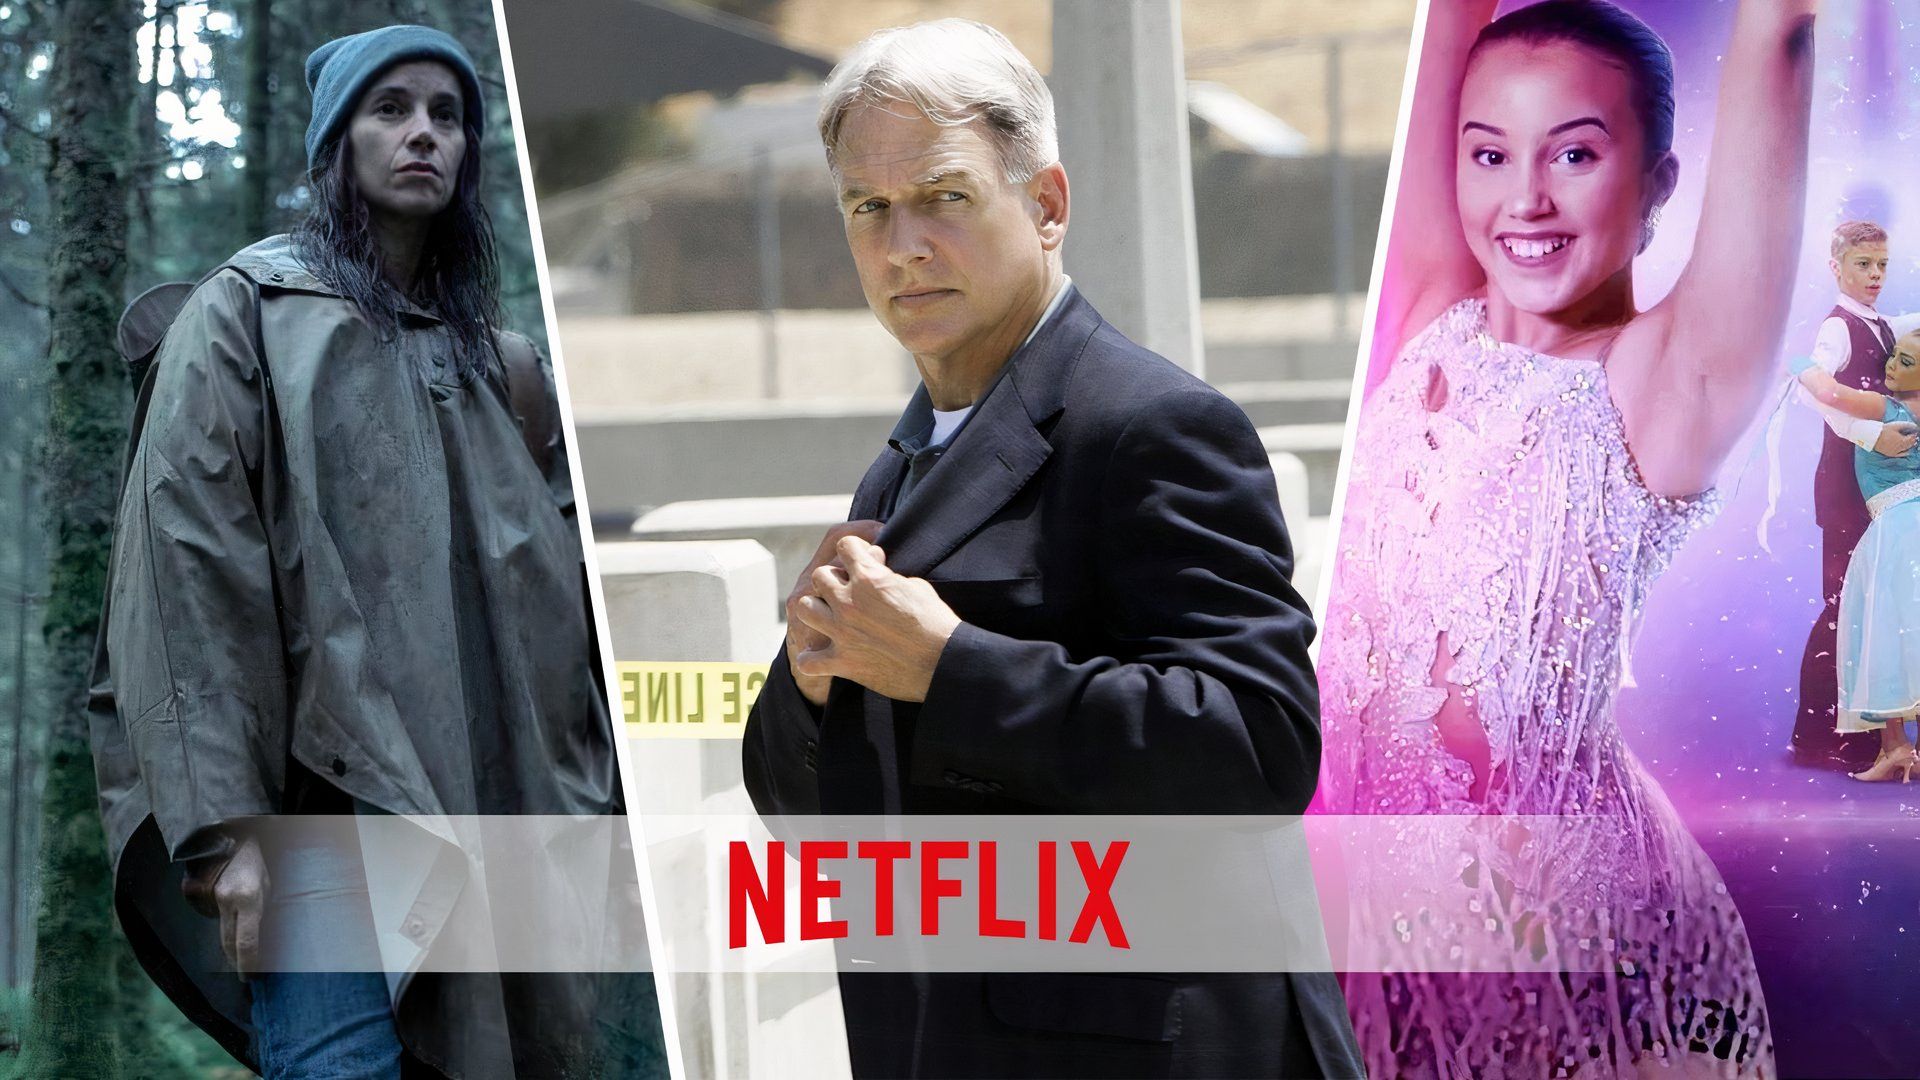 An edited image of Black Spot, NCIS, and Baby Ballroom with the Netflix logo